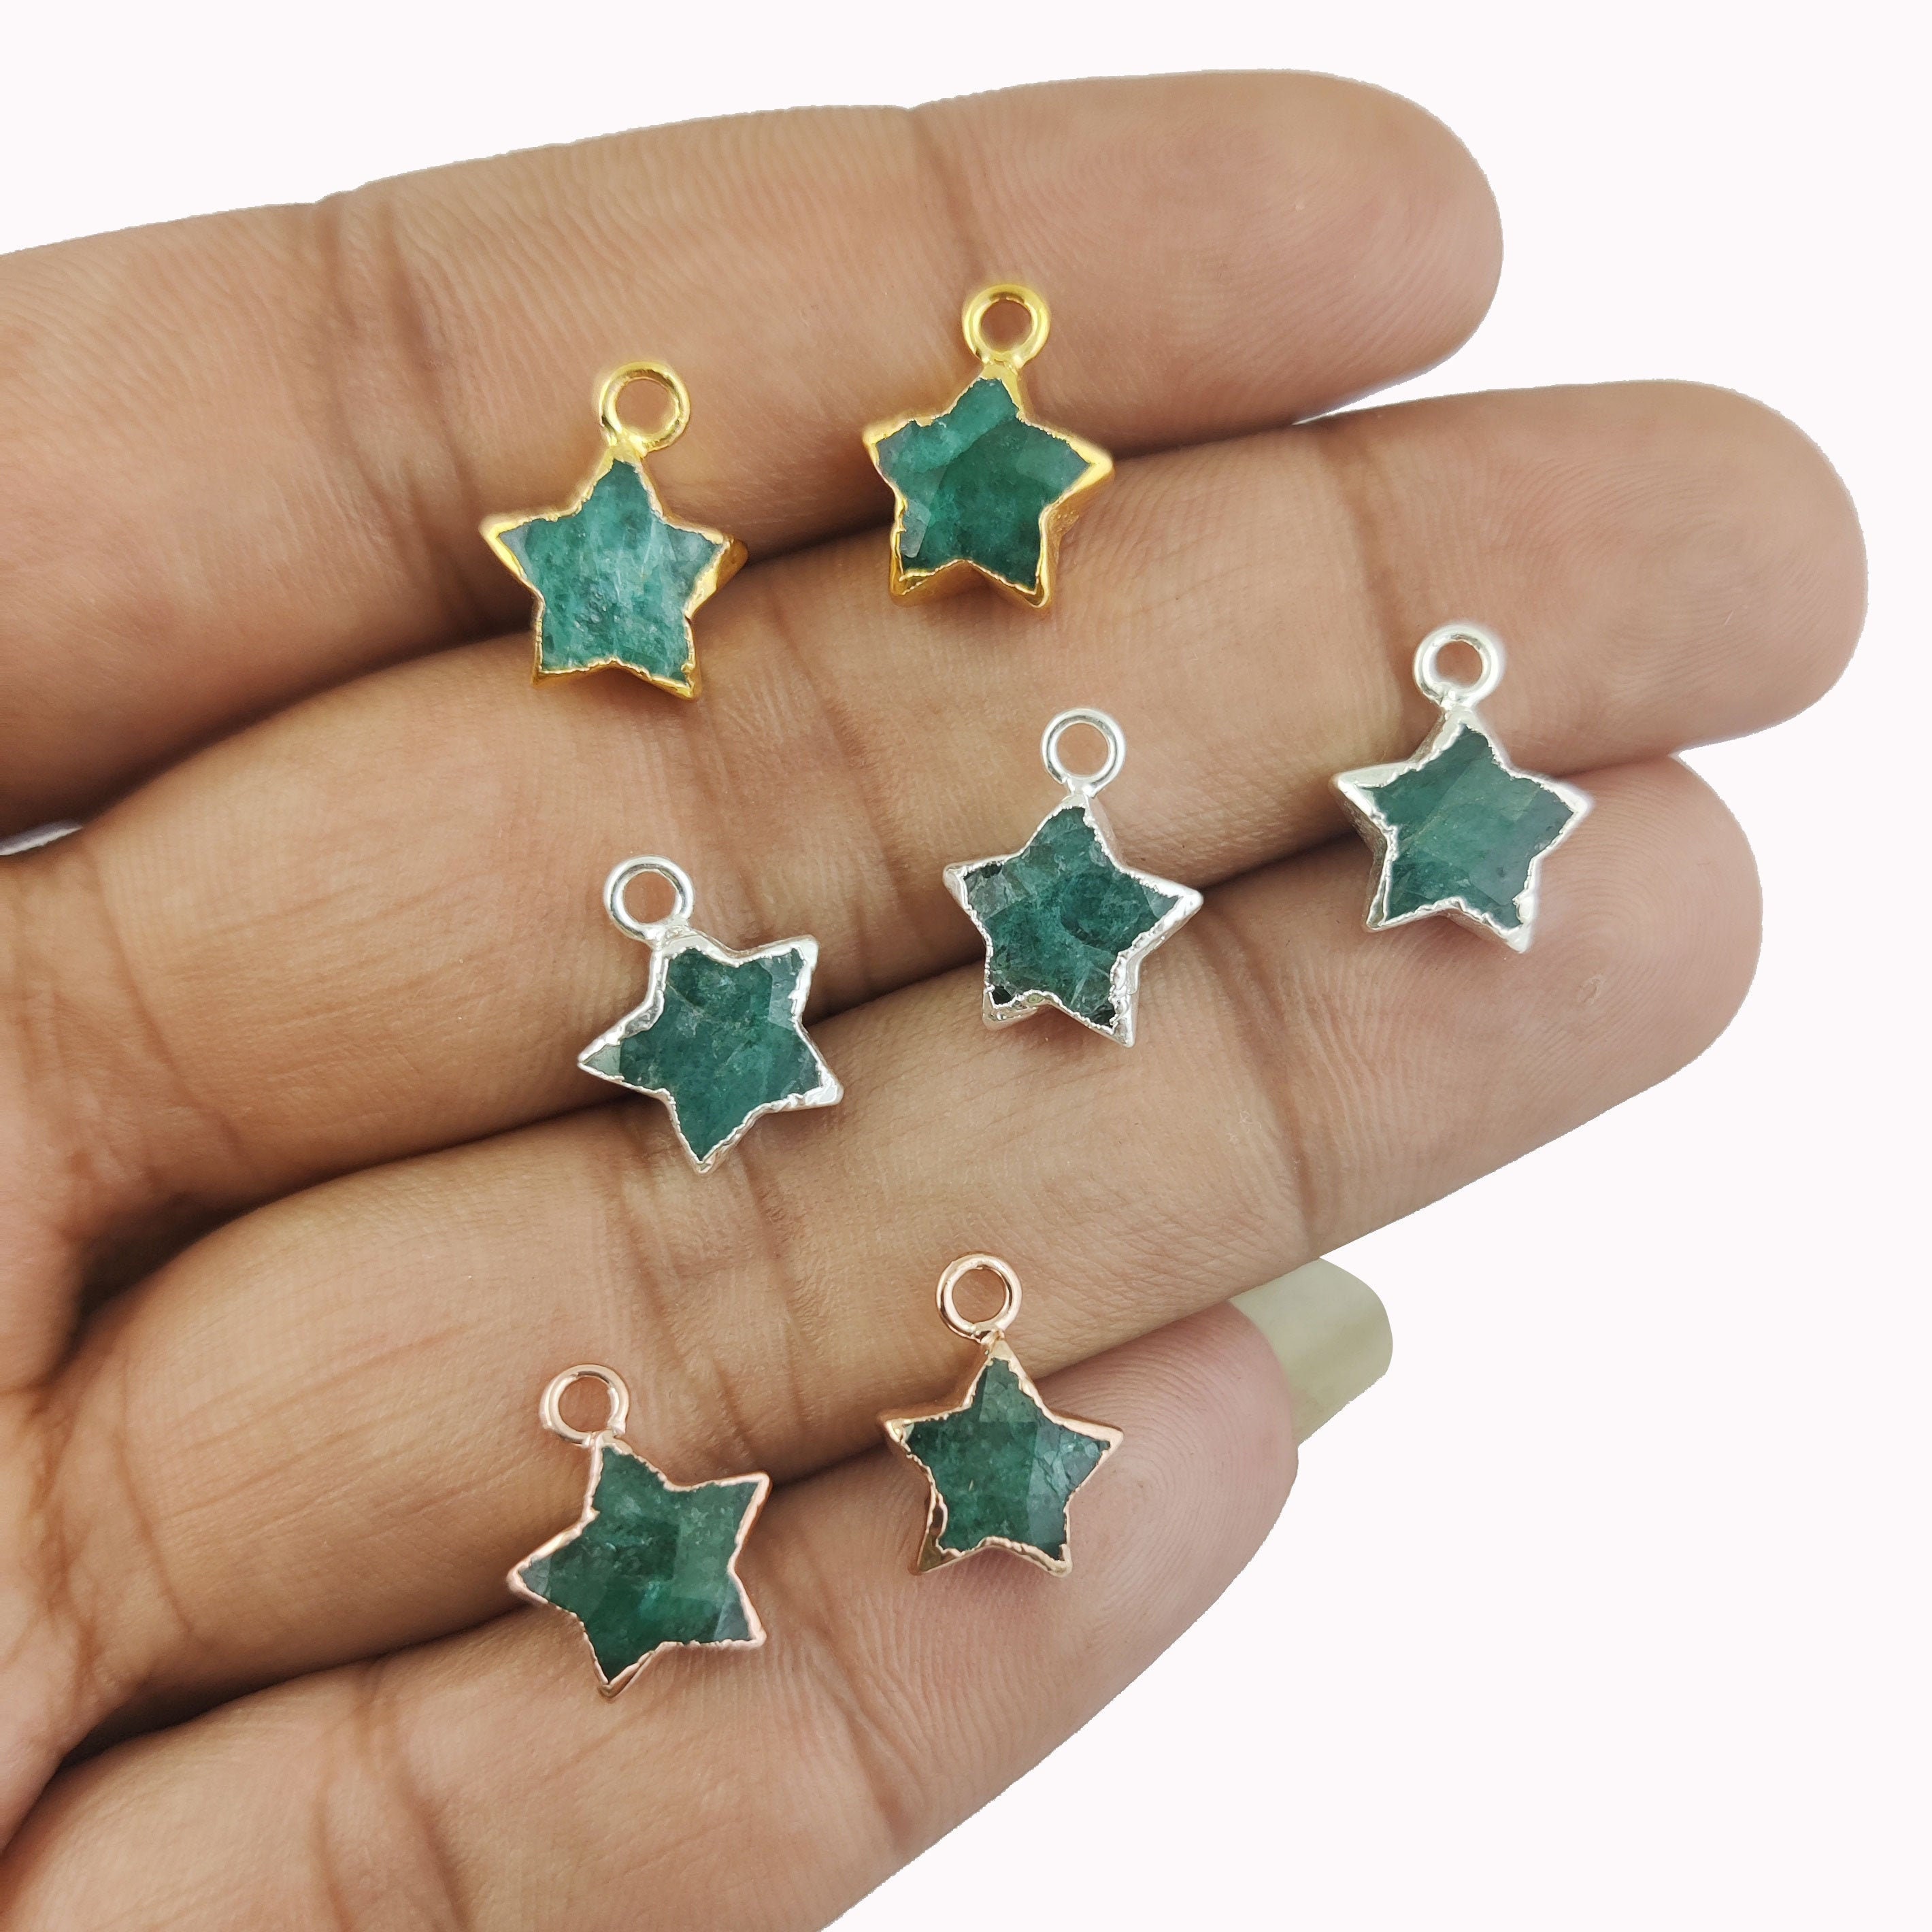 Spiral Star Clay Charm Necklaces, Earrings, Keyrings, Phone Charms